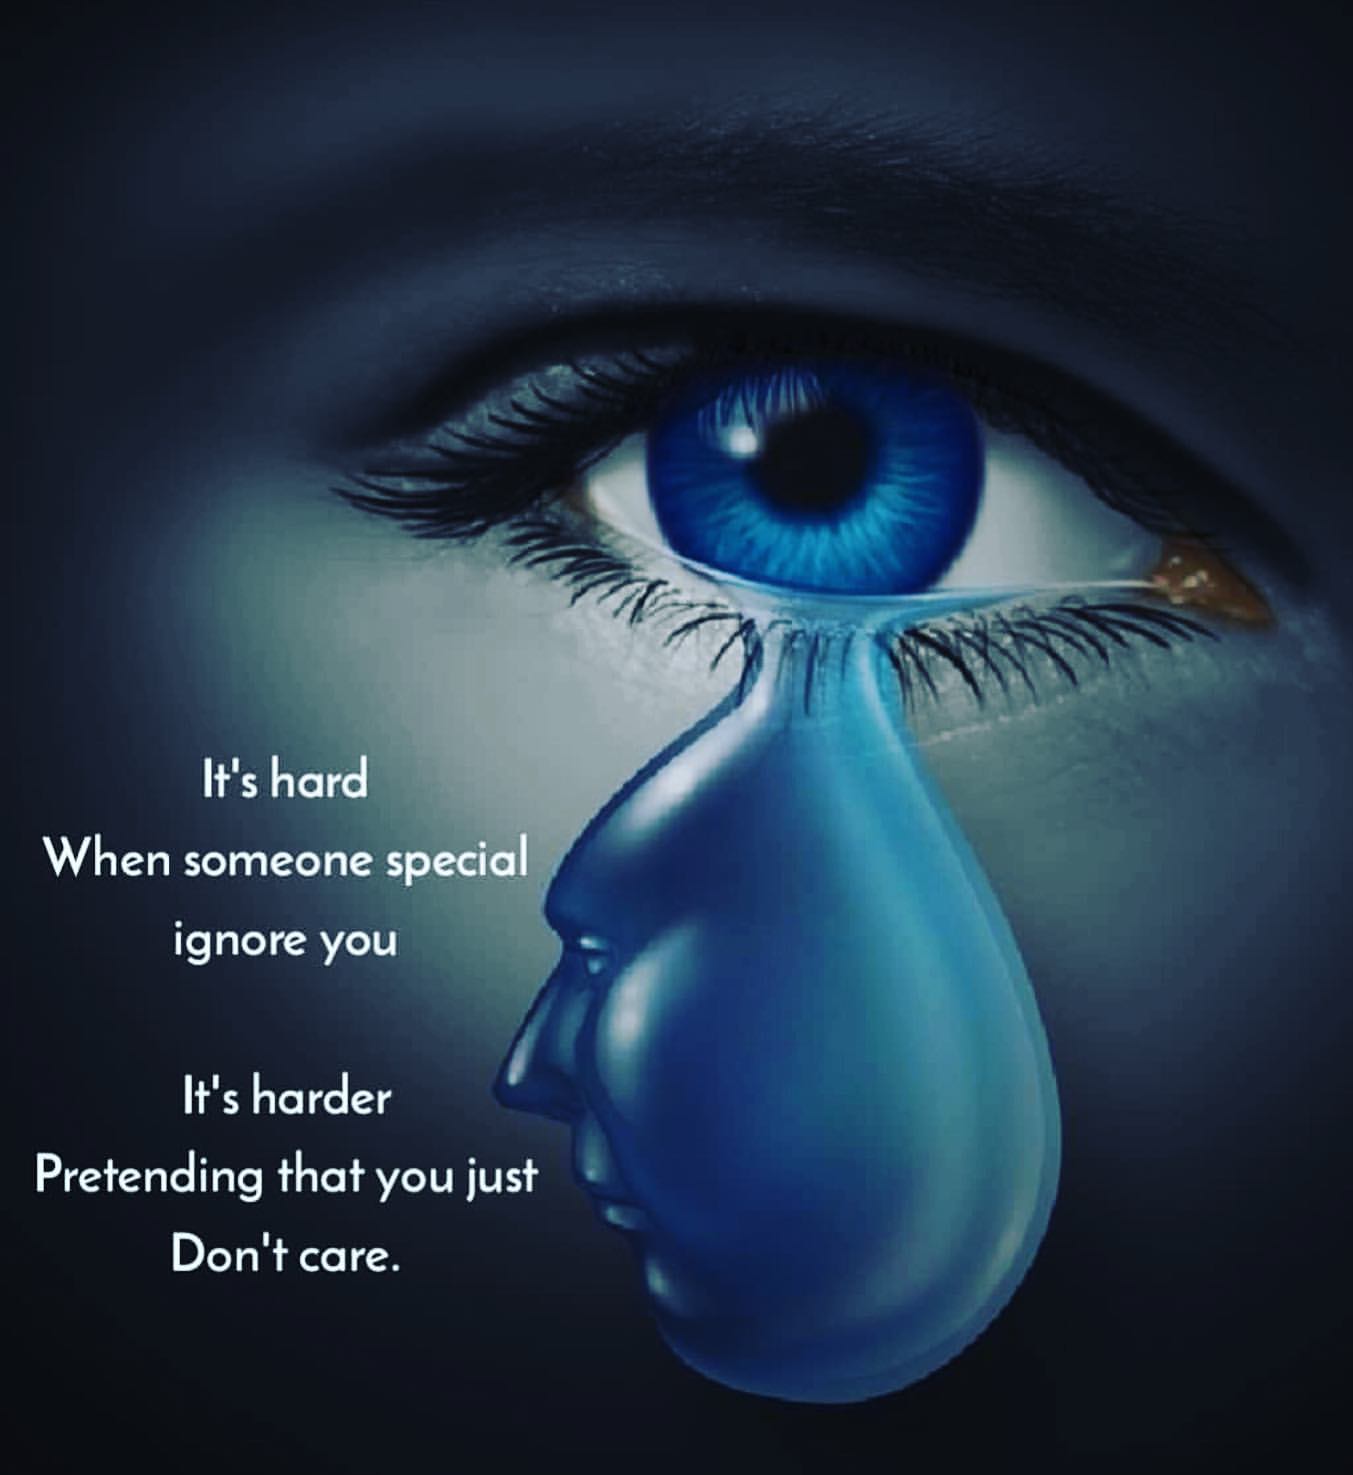 It's hard when someone special ignore you. It's harder pretending that you just don't care.